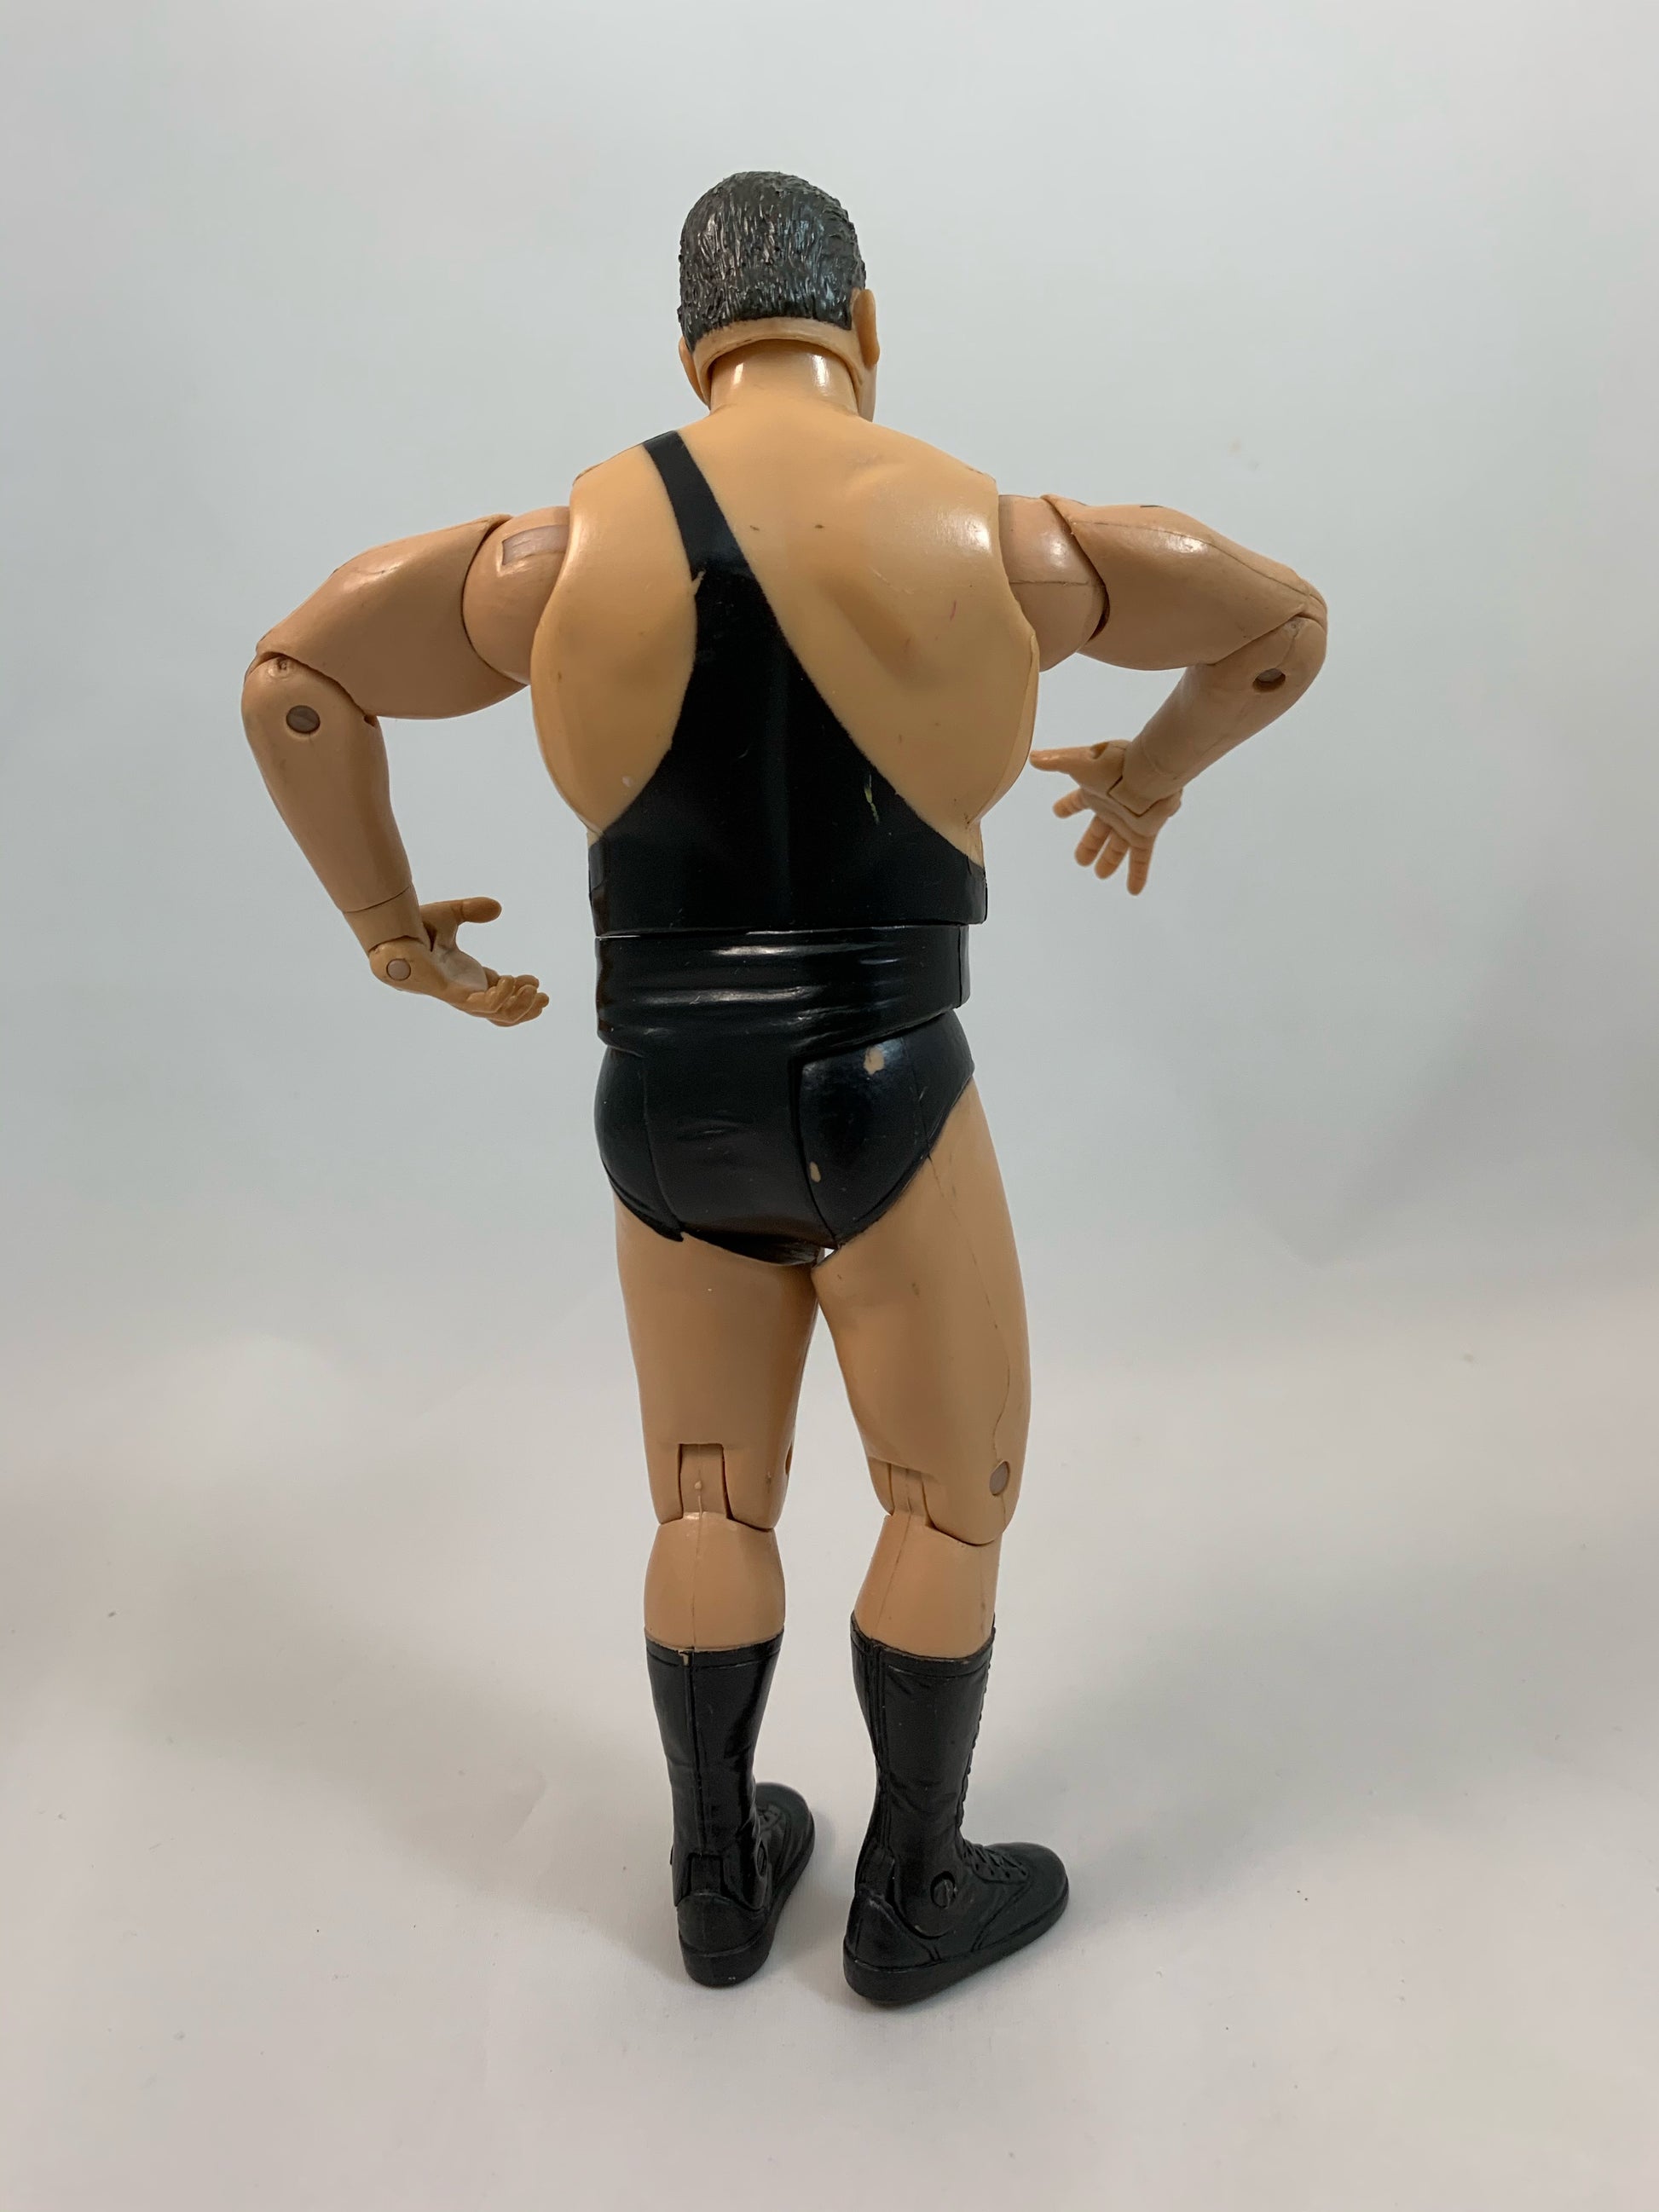 MATTEL SERIES 1 Rare WWE BIG SHOW Commemorative Belt LIMITED EDITION 1 of 1000 - Loose Action Figure